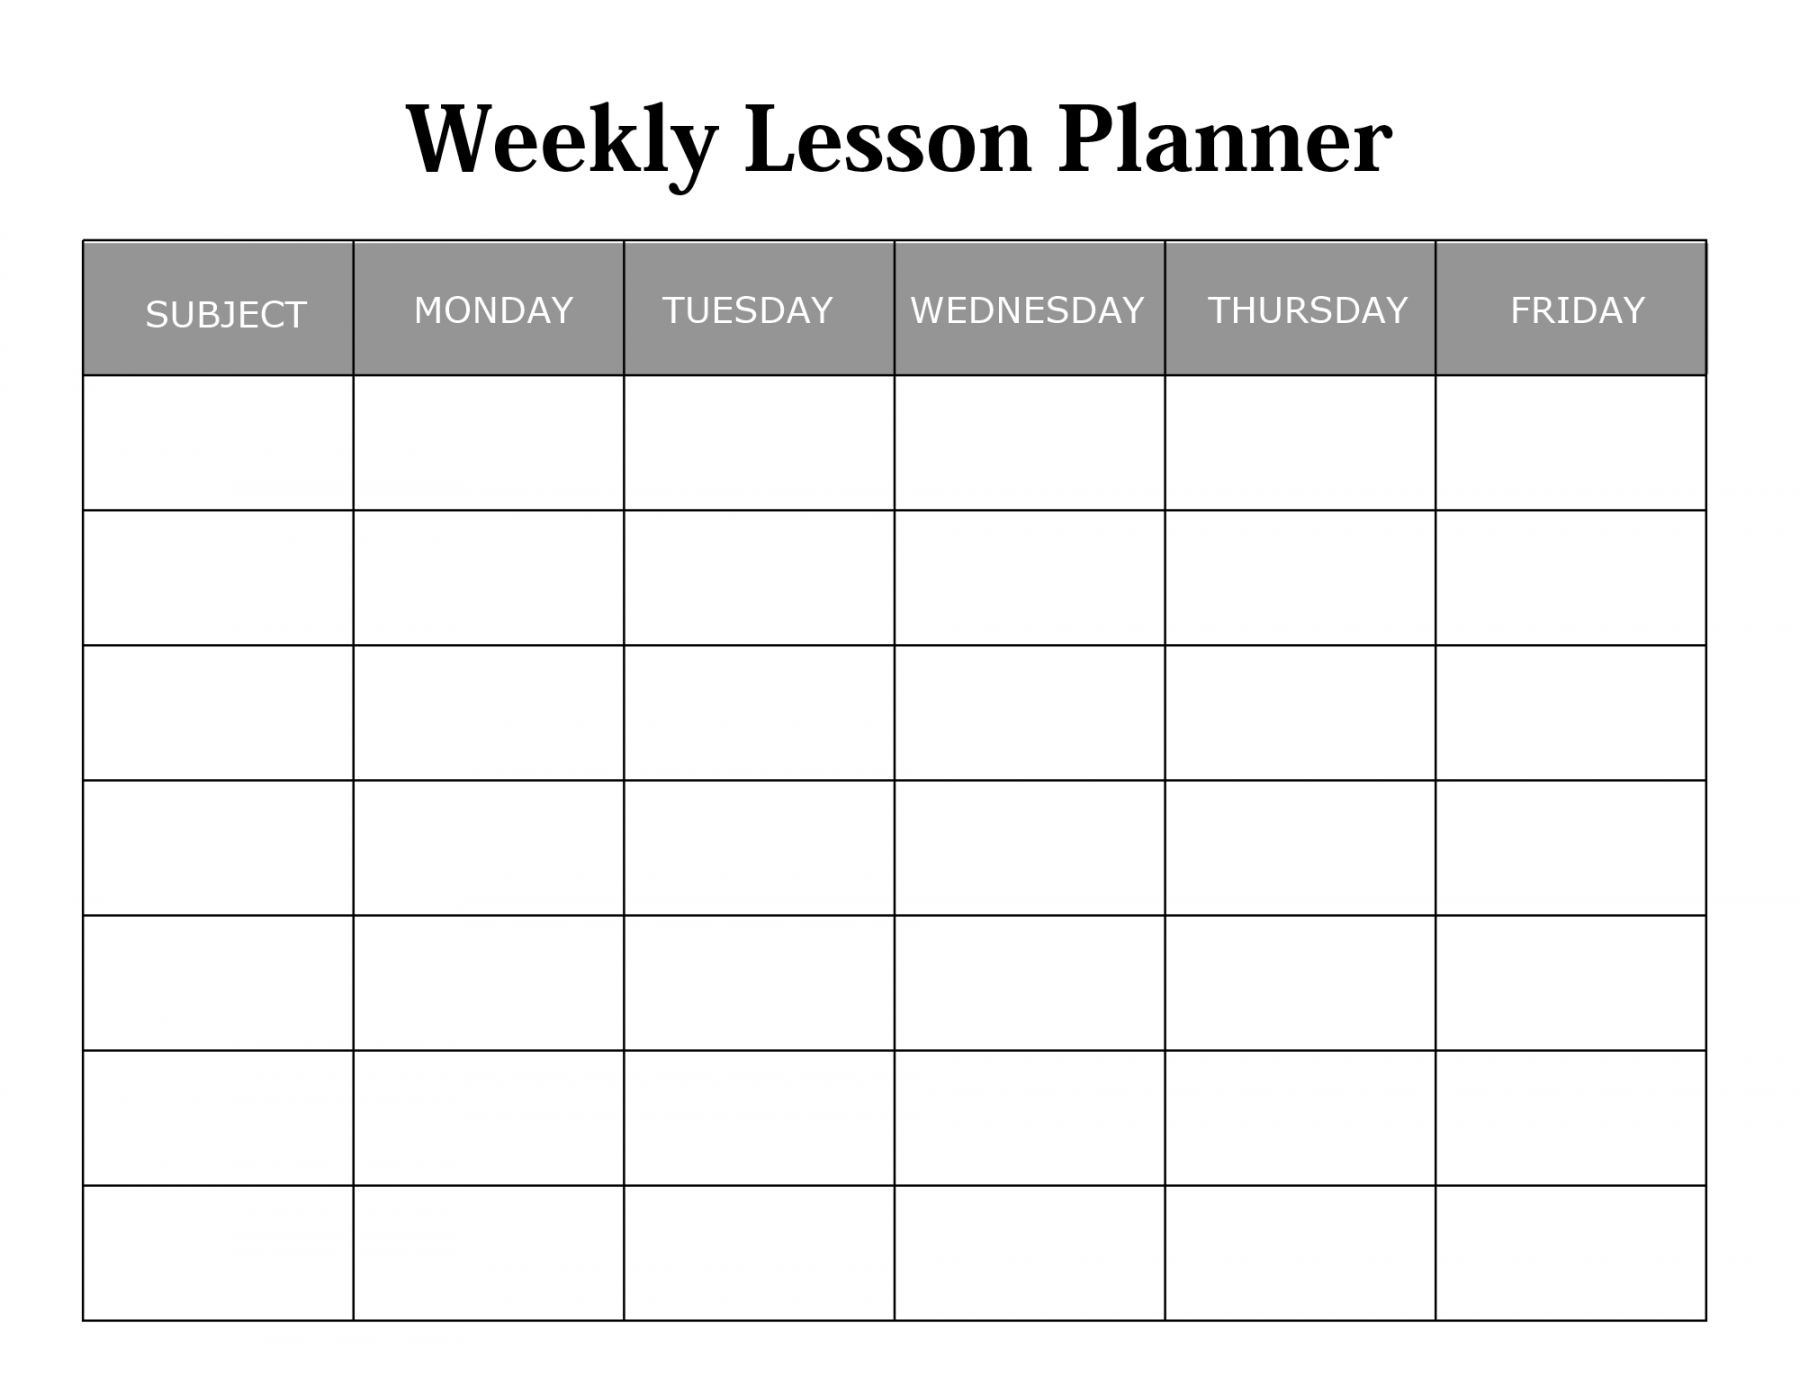 Weekly Lesson Plan Templates:  Best Lesson Planners, Free Download!